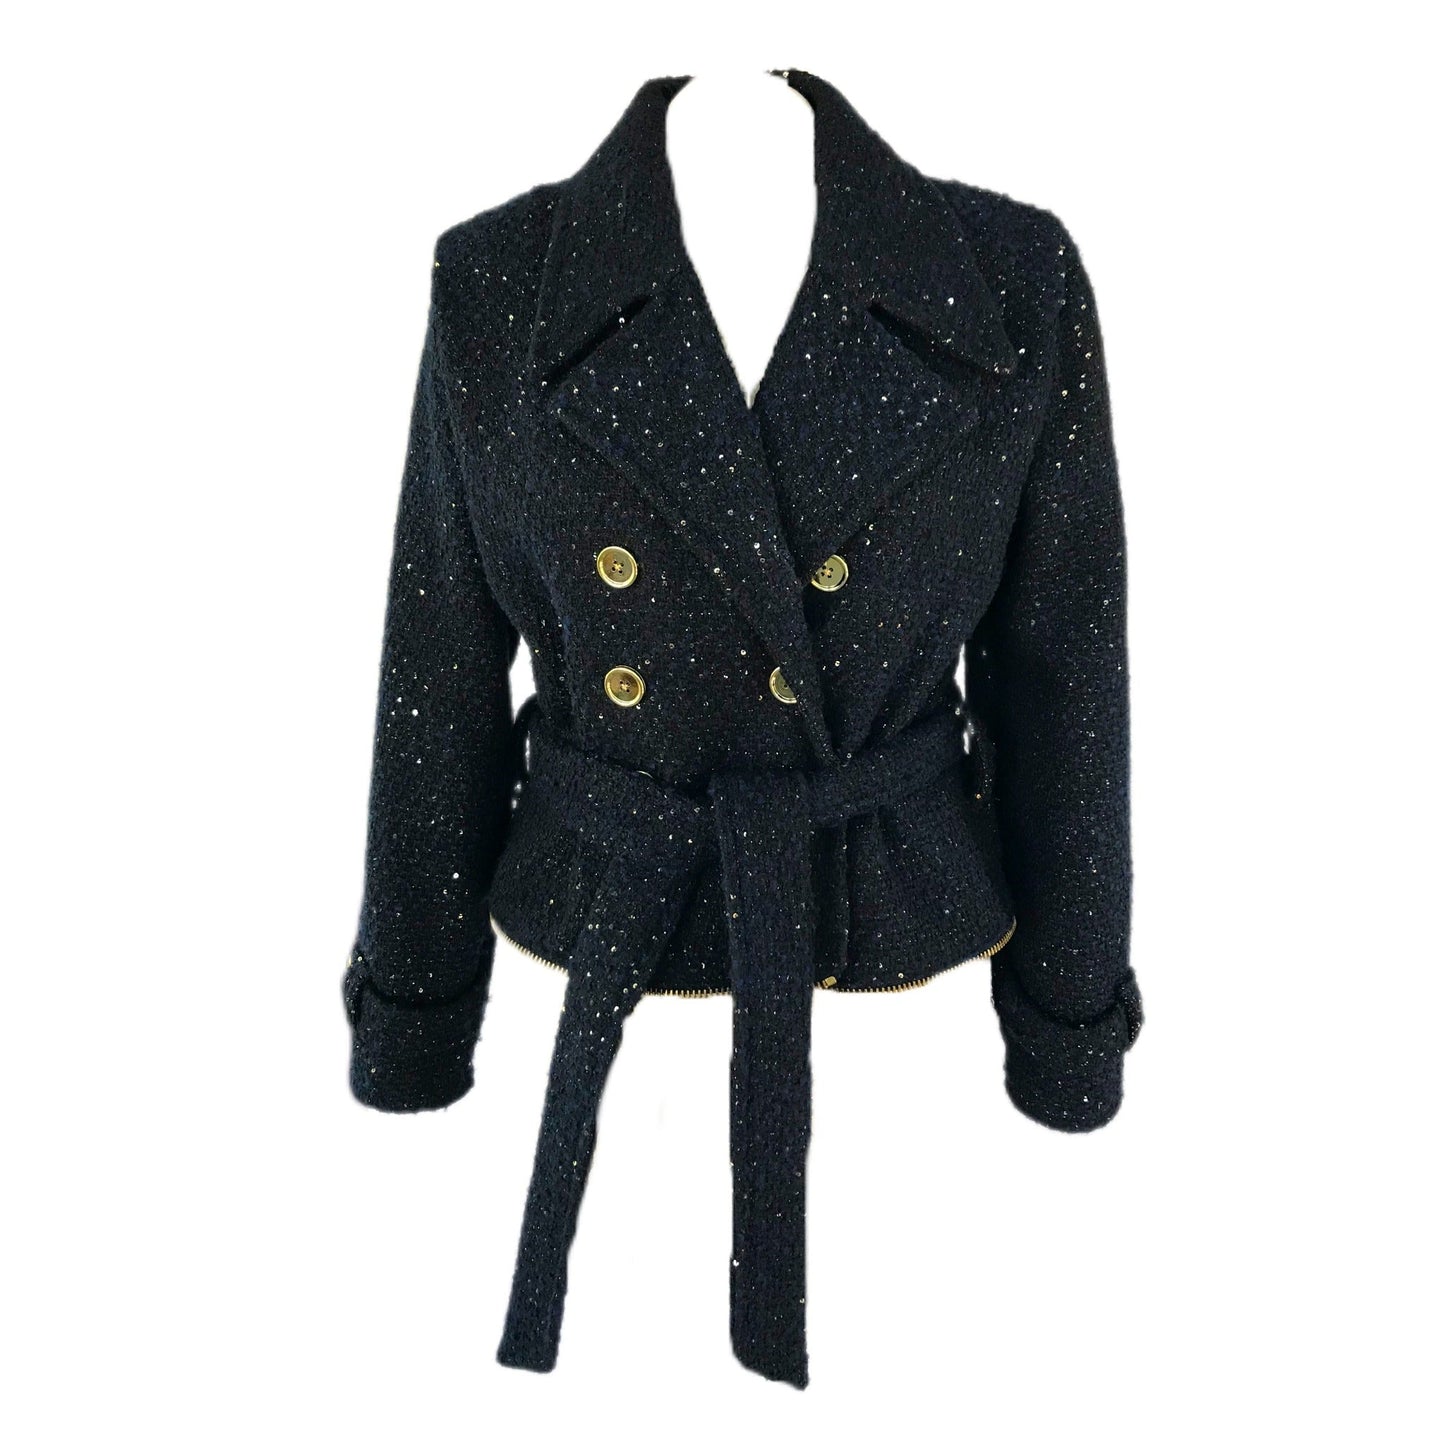 Women's 3-Part Midnight Boucle Trench Coat - Transforming Design